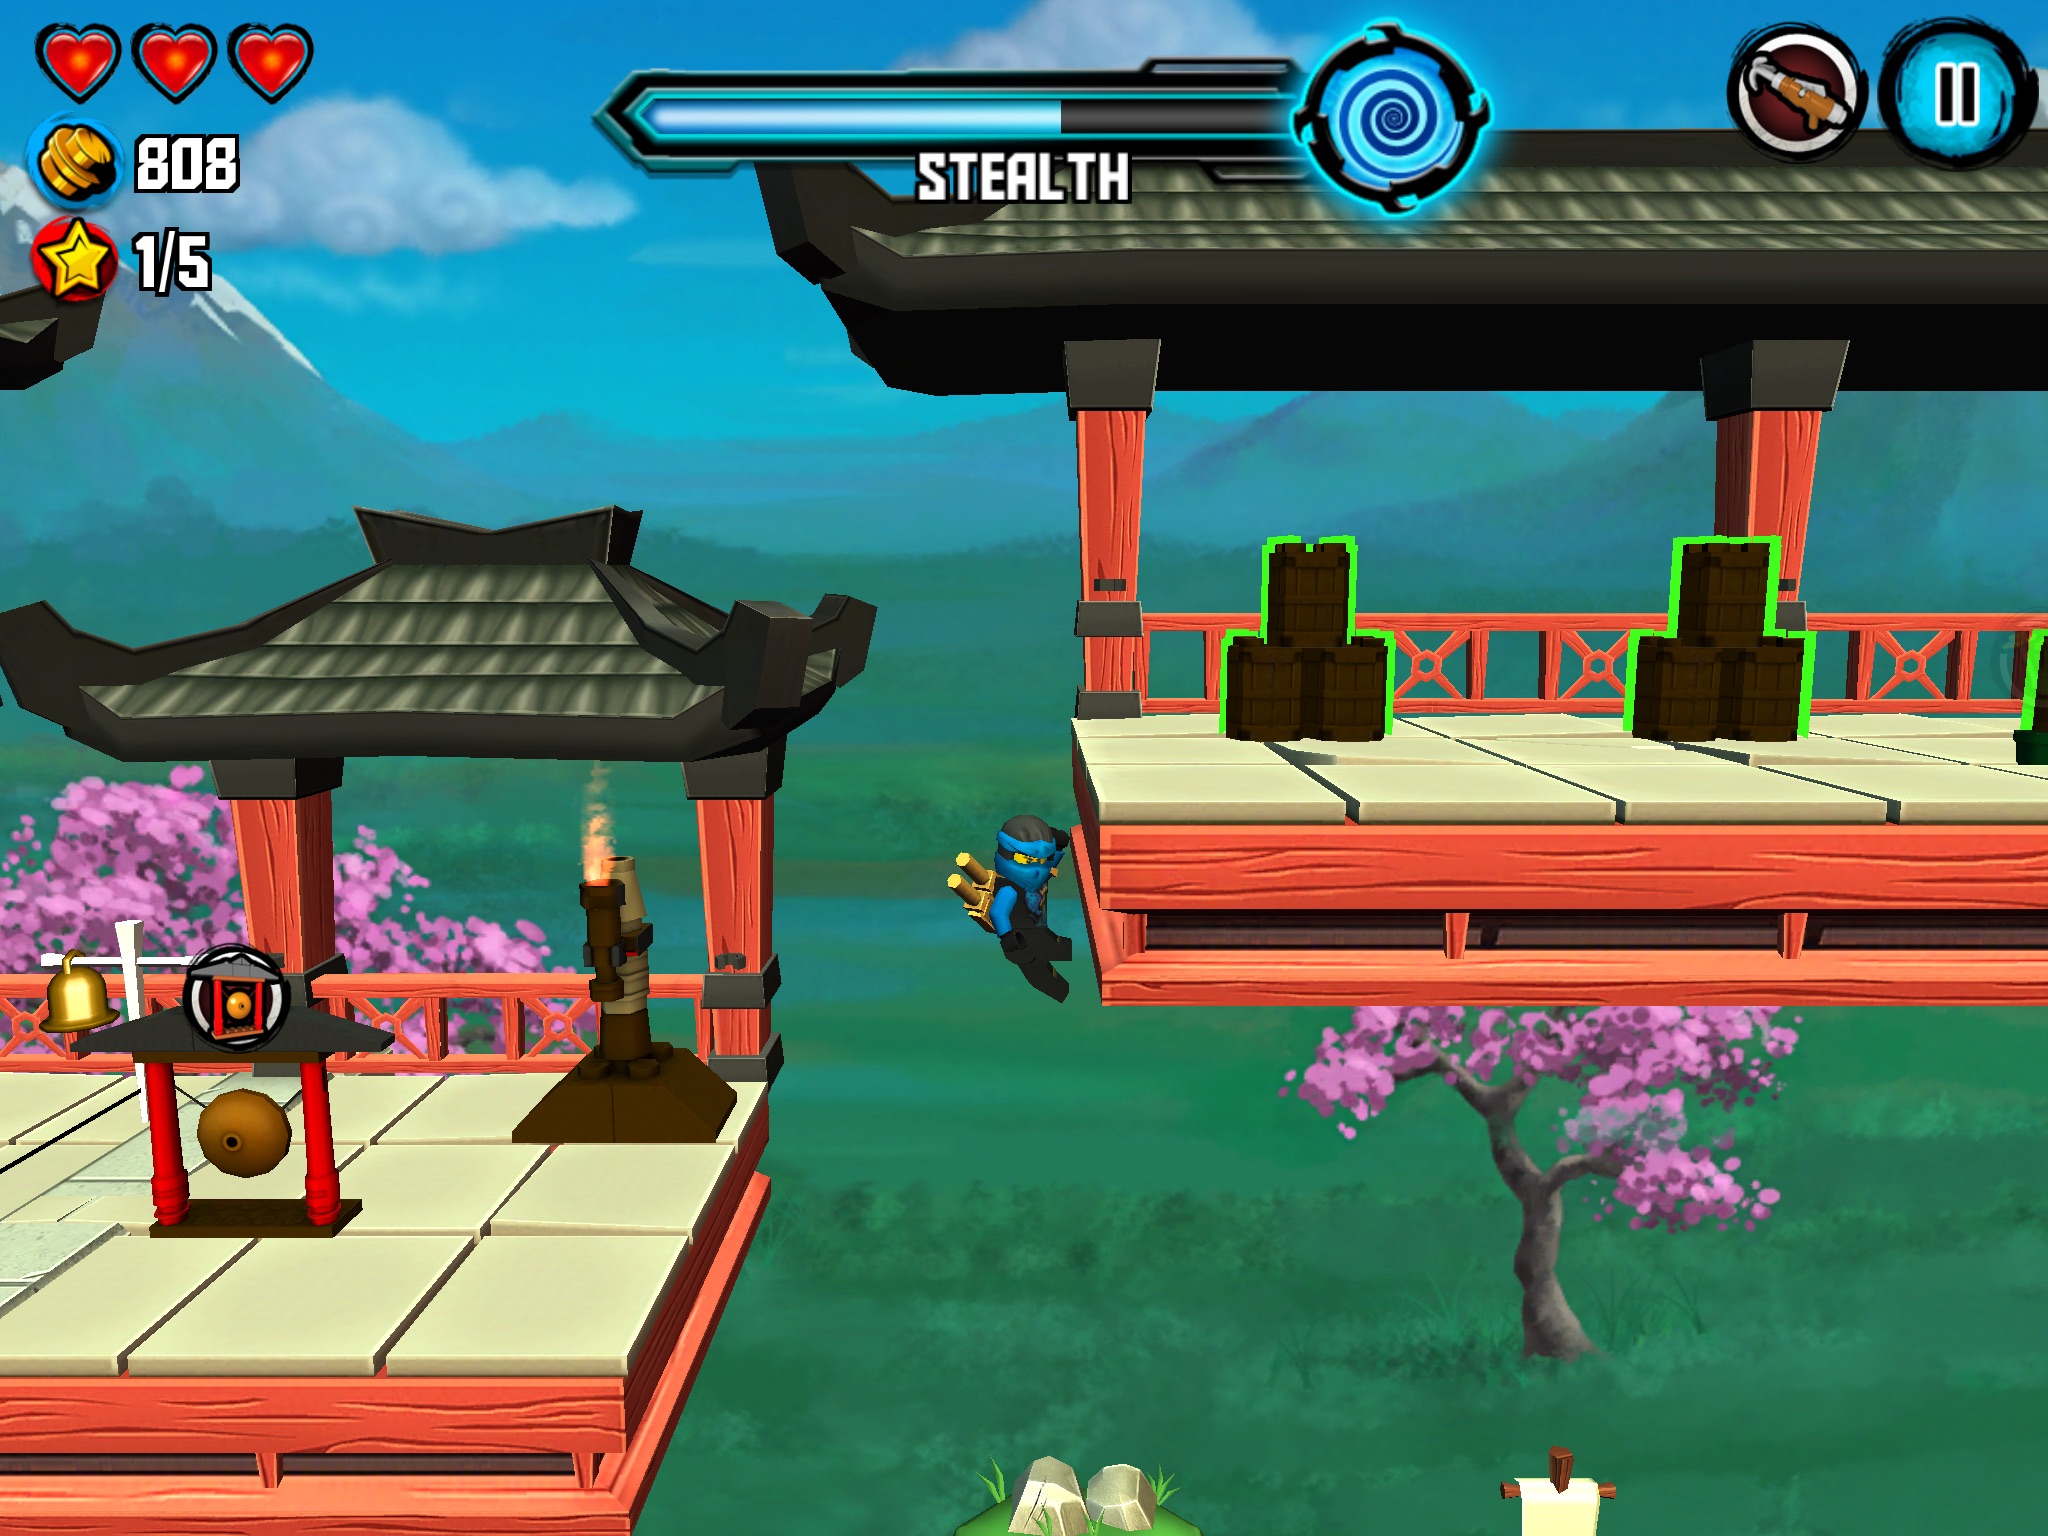 Scale, climb and hide your way to victory in LEGO Ninjago: Skybound.